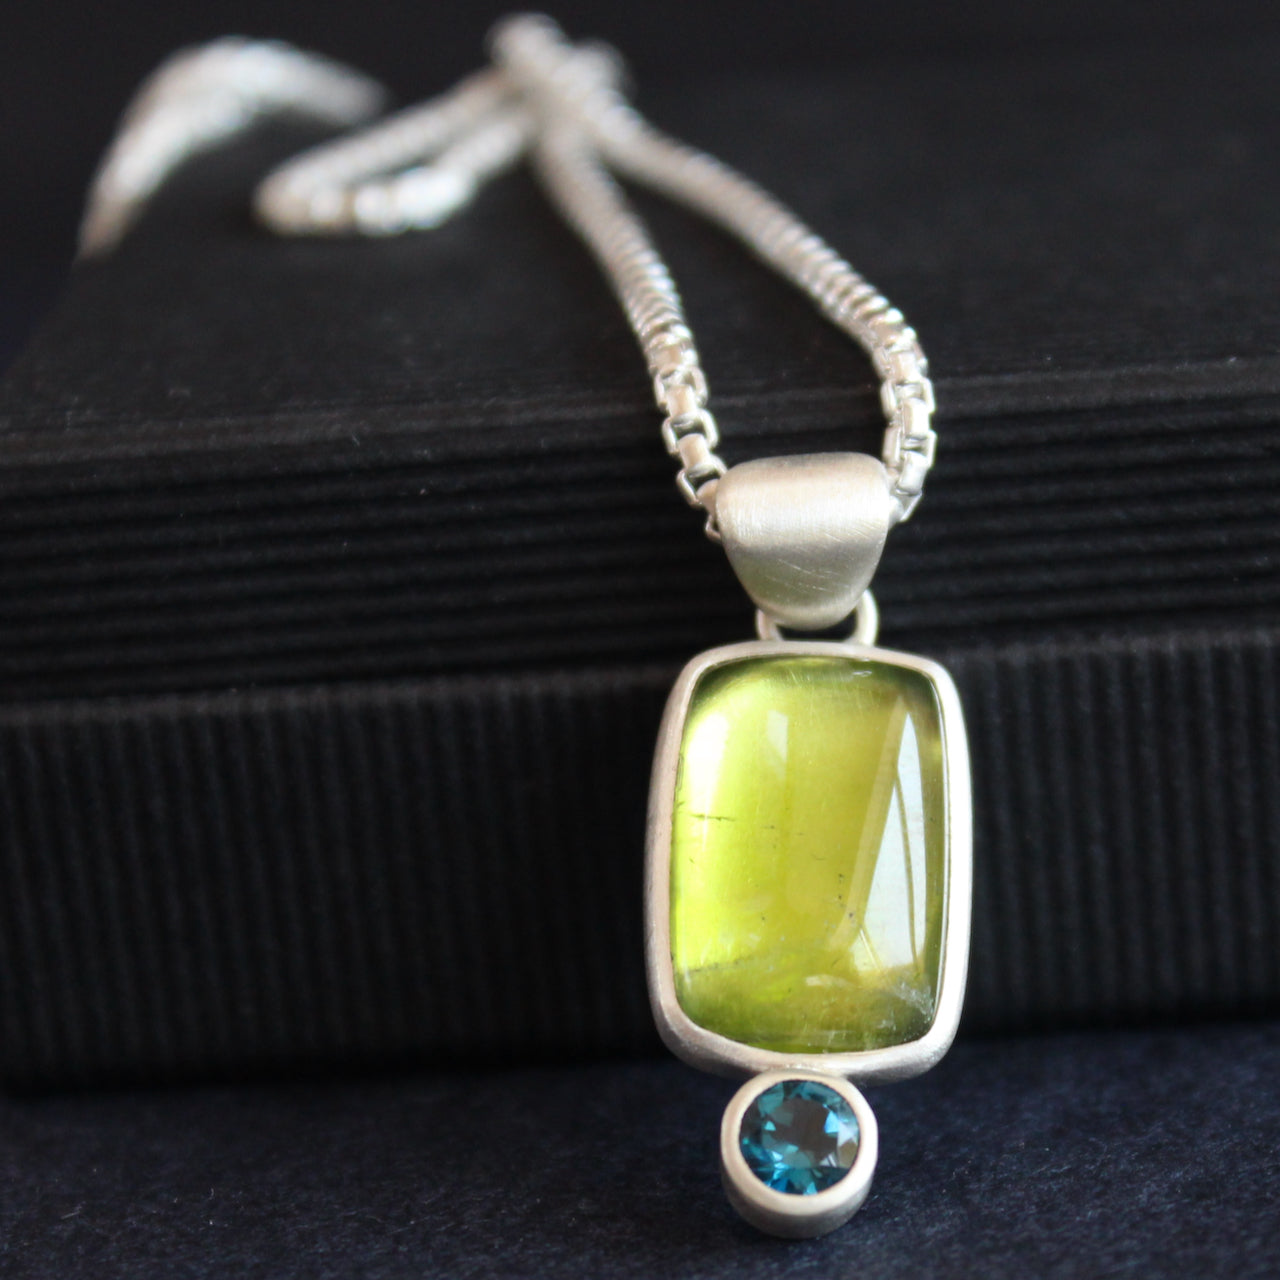 a silver pendant with a bright green stone set in silver oval and small blue stone below by Cornwall jewellery designer Carin Lindberg